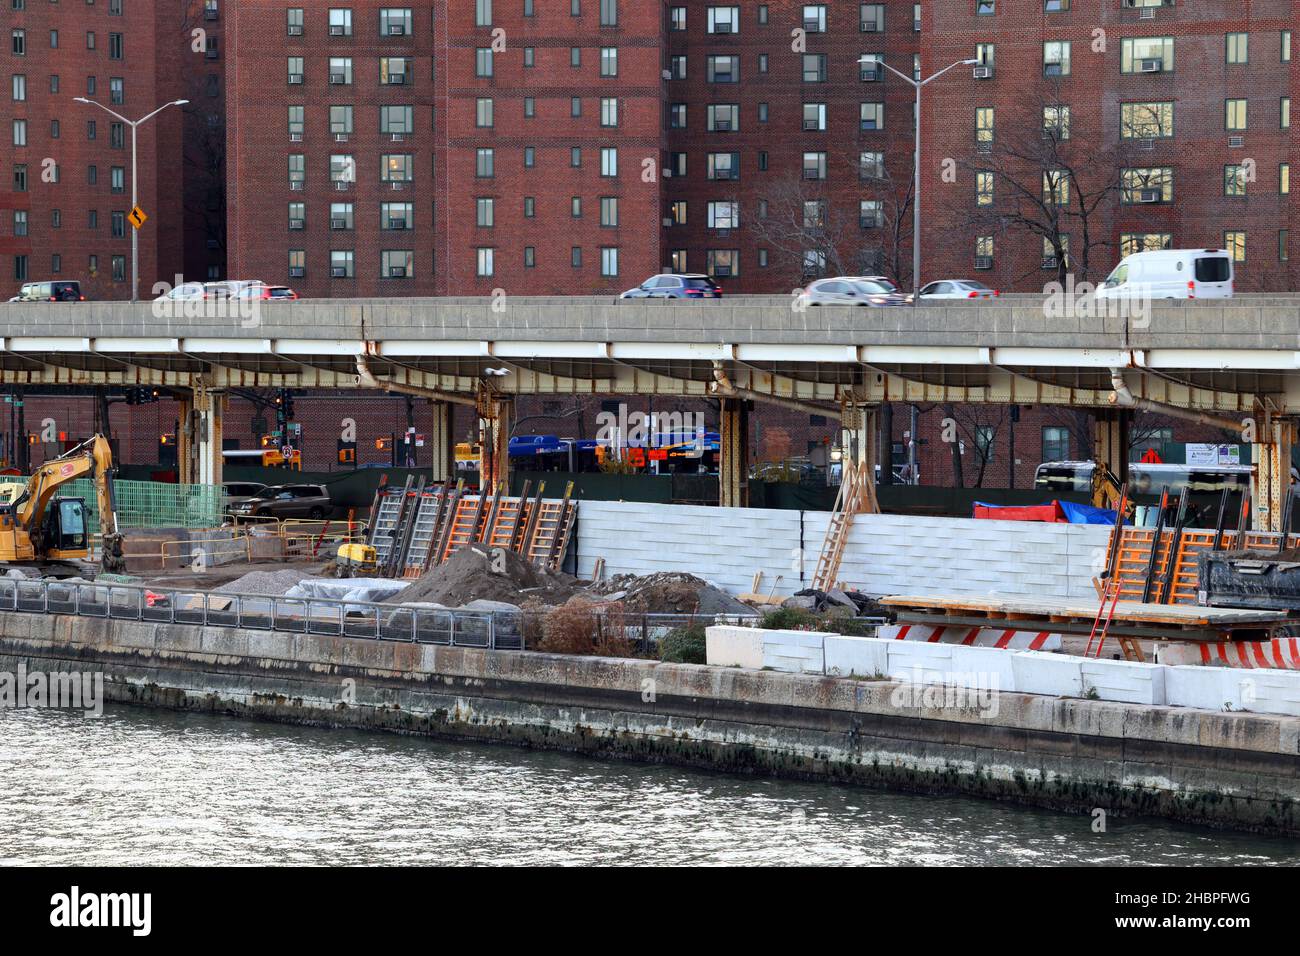 East Side Coastal Resiliency flood walls being built at Stuyvesant Cove Park along the East River Greenway and waterfront, New York, NY. Stock Photo